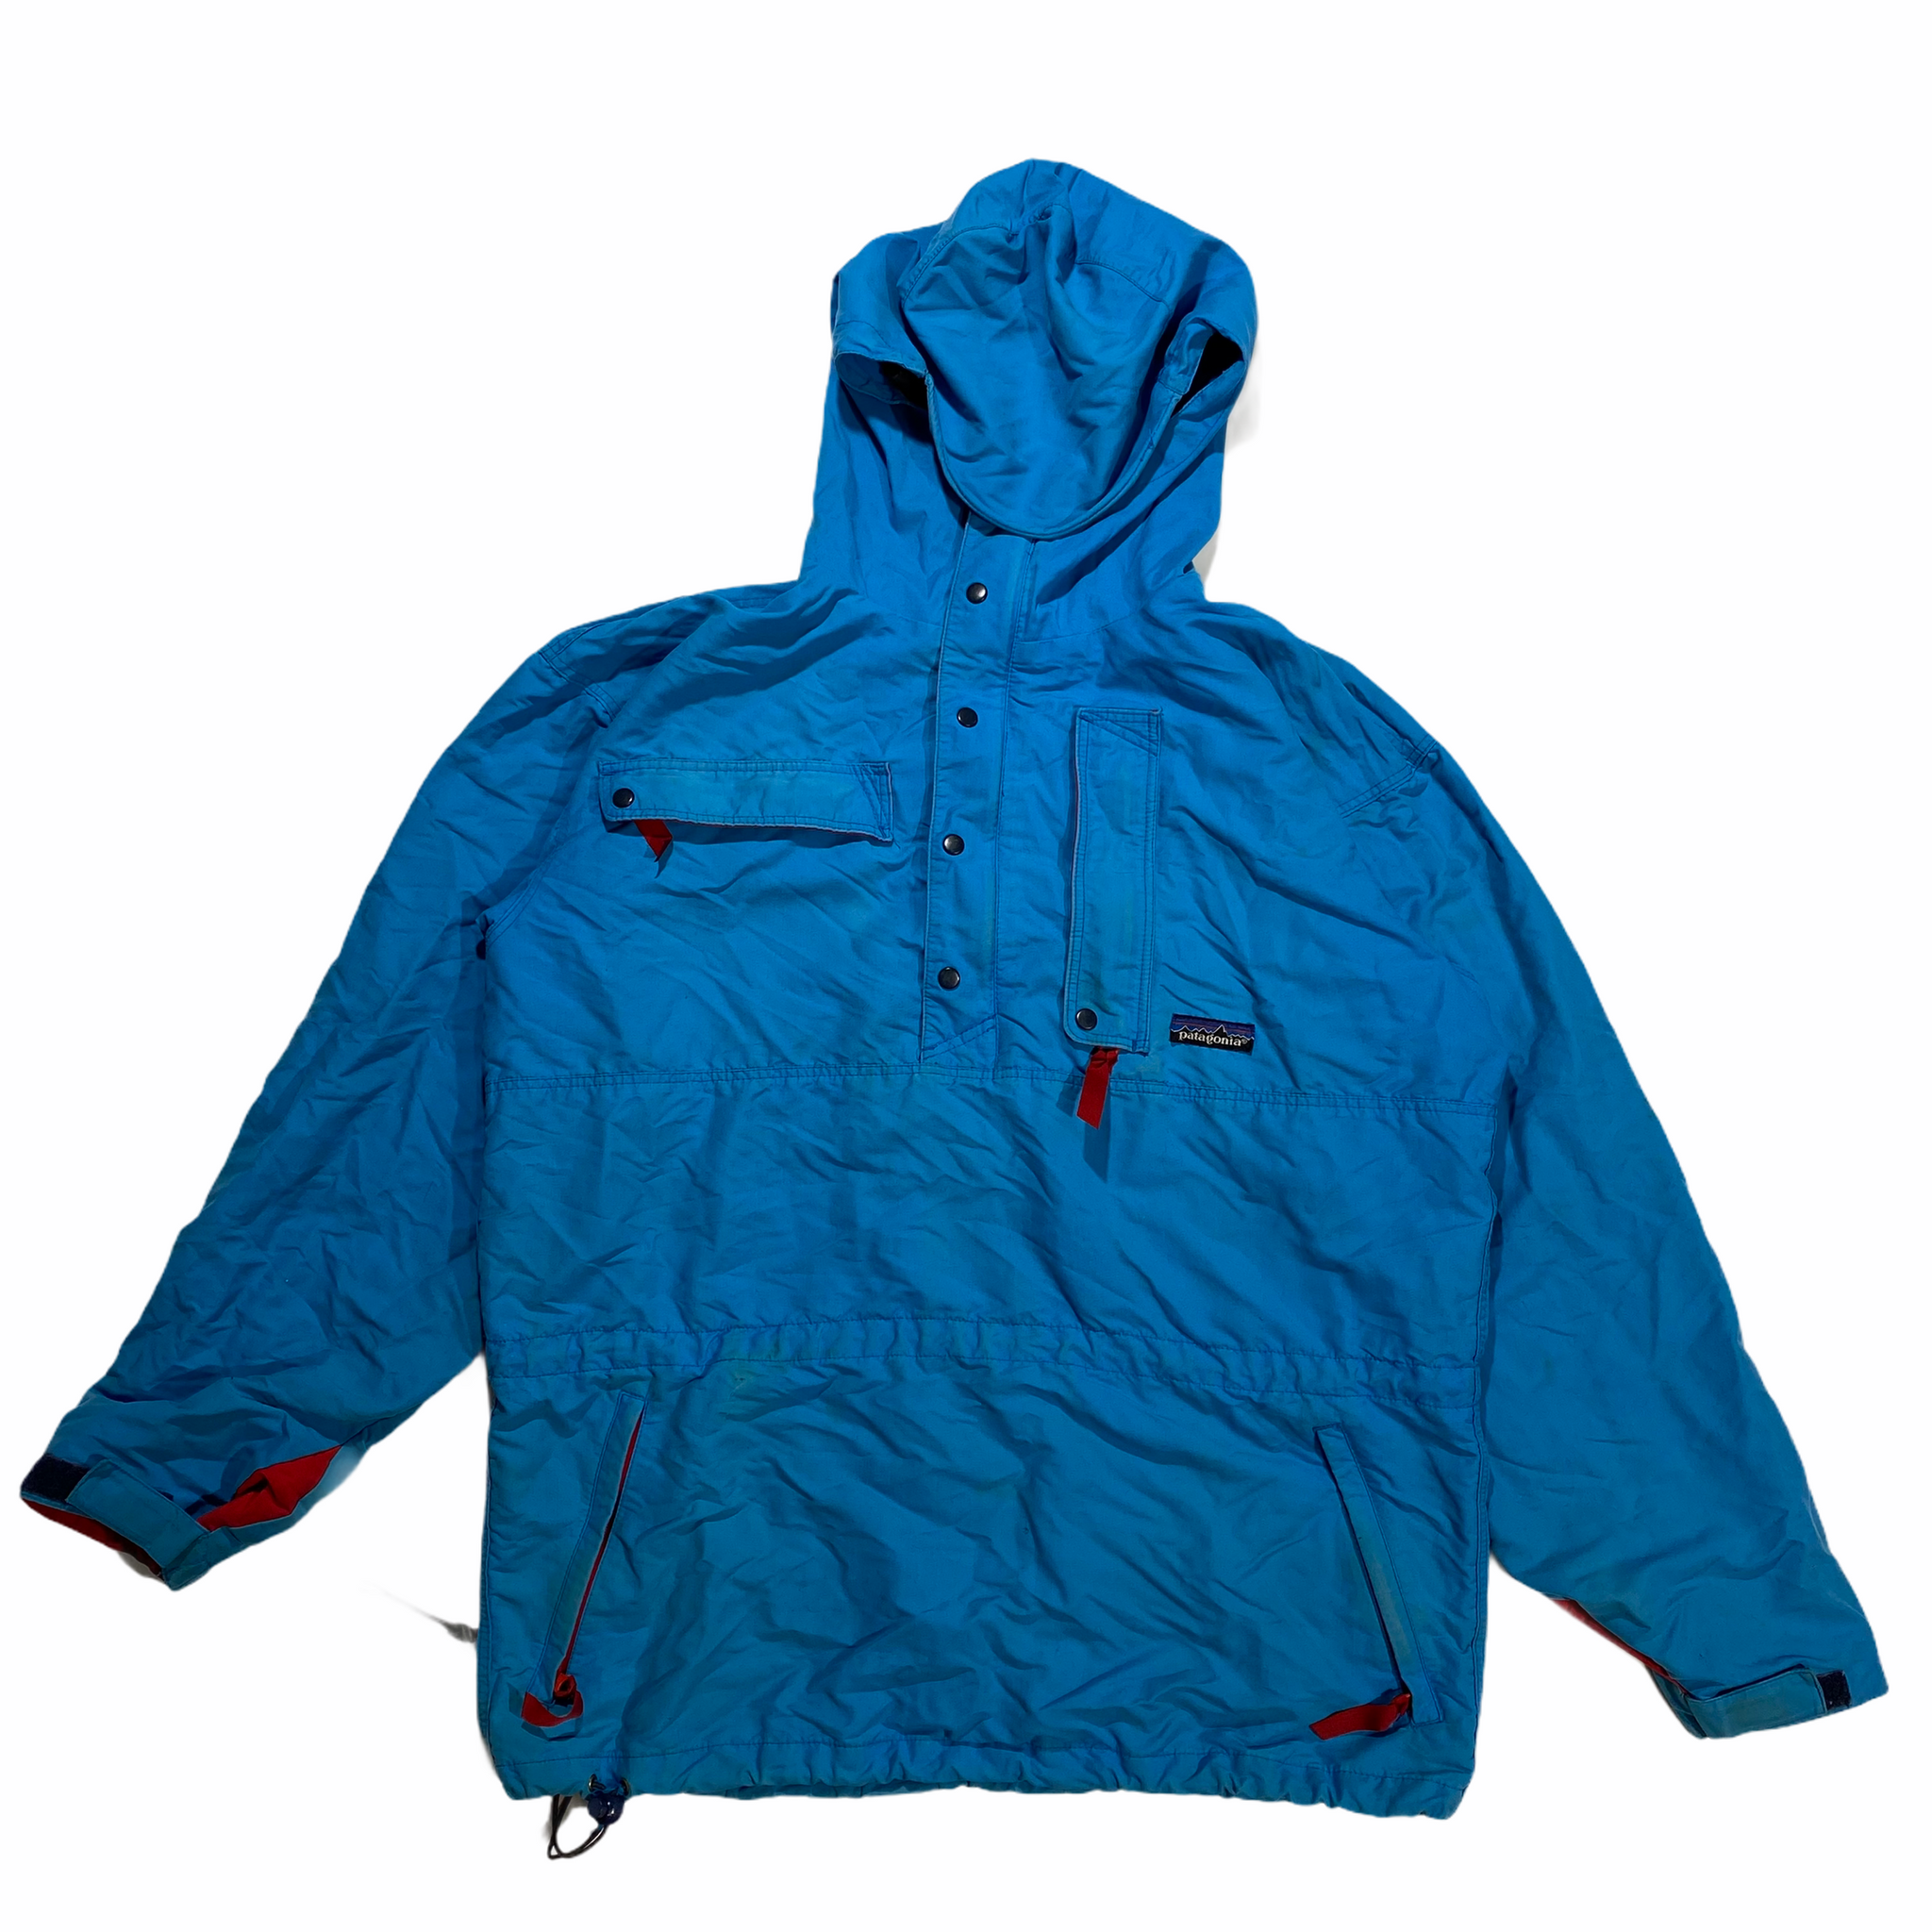 90s Patagonia pullover jacket. Small – Vintage Sponsor